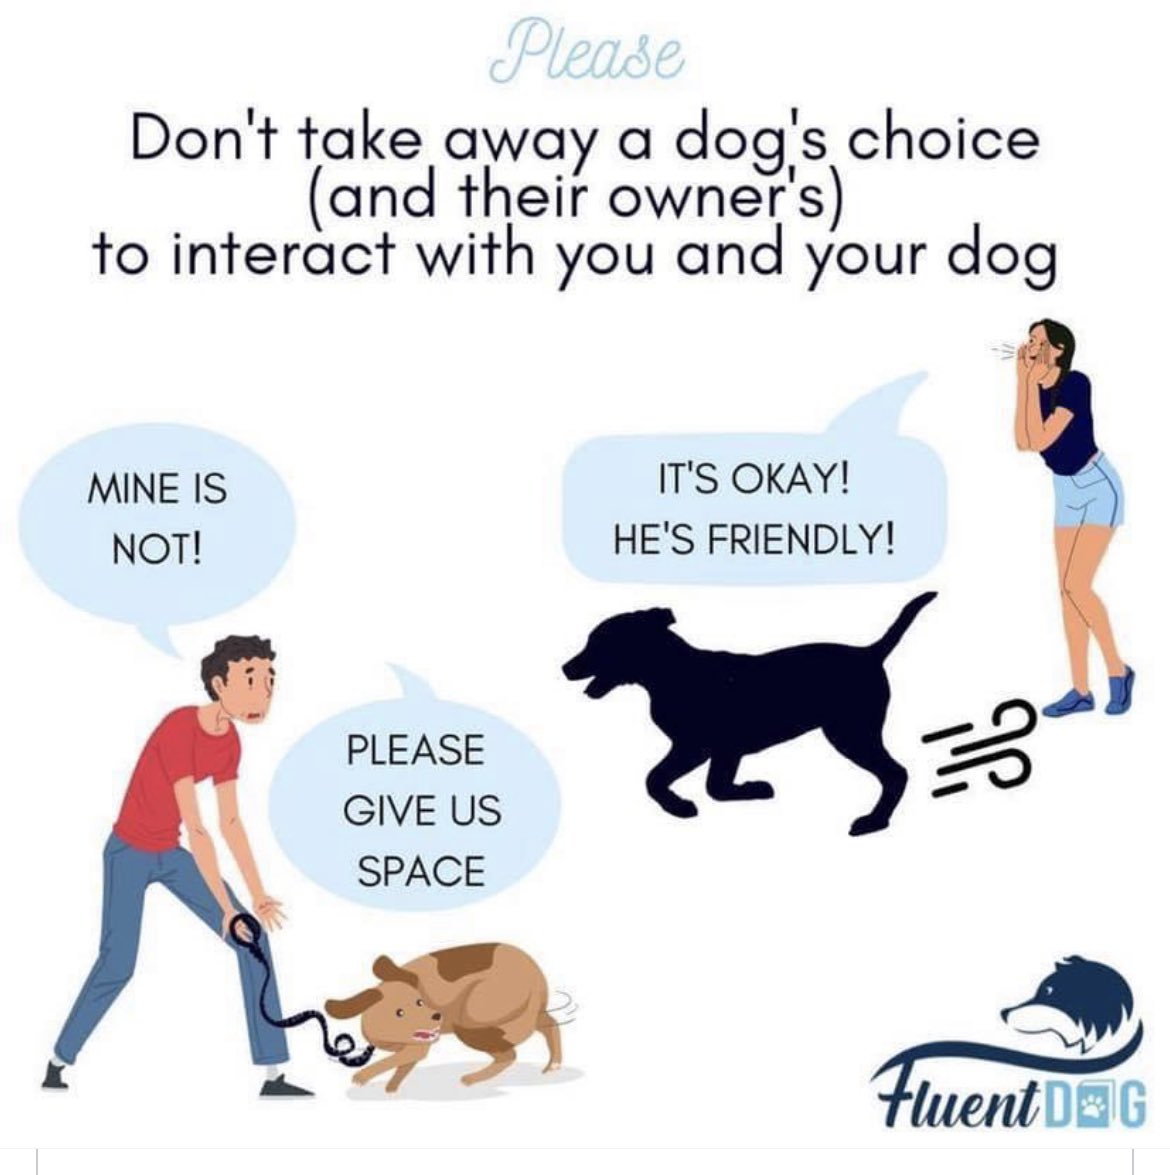 When walking our dogs, we must be aware and respect that some dogs ( and people) get really stressed when approached by dogs they do not know

Keep your dog within your control with positive reinforcement training 🚶🏻‍♂️🐕‍🦺🚶🏼‍♀️

#dogs #dogwalks #positivereinforcementtraining